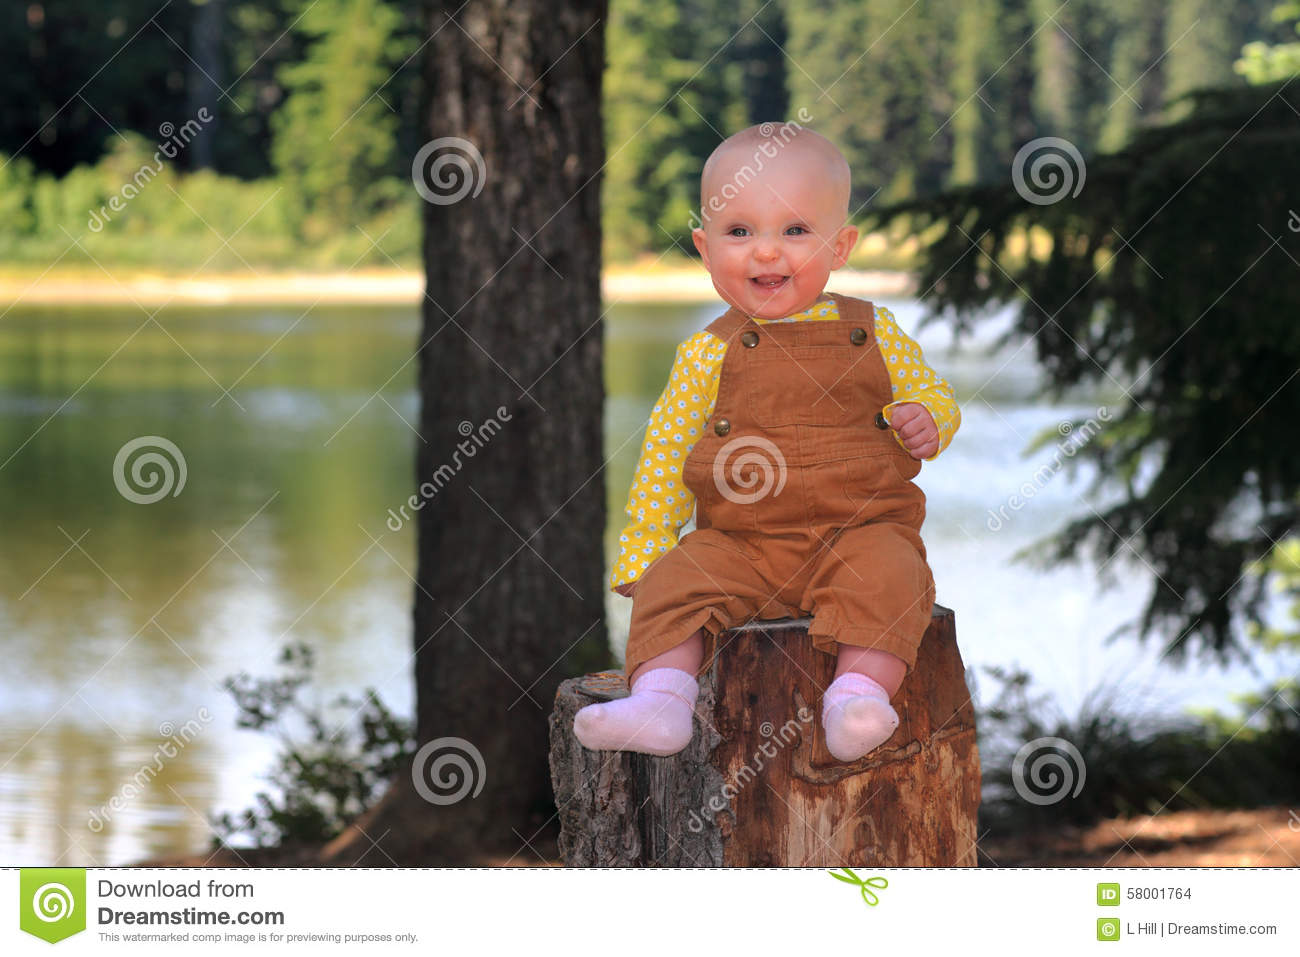 Cute Smiling Baby Wearing Overalls Sitting On A Stump In Front Of A